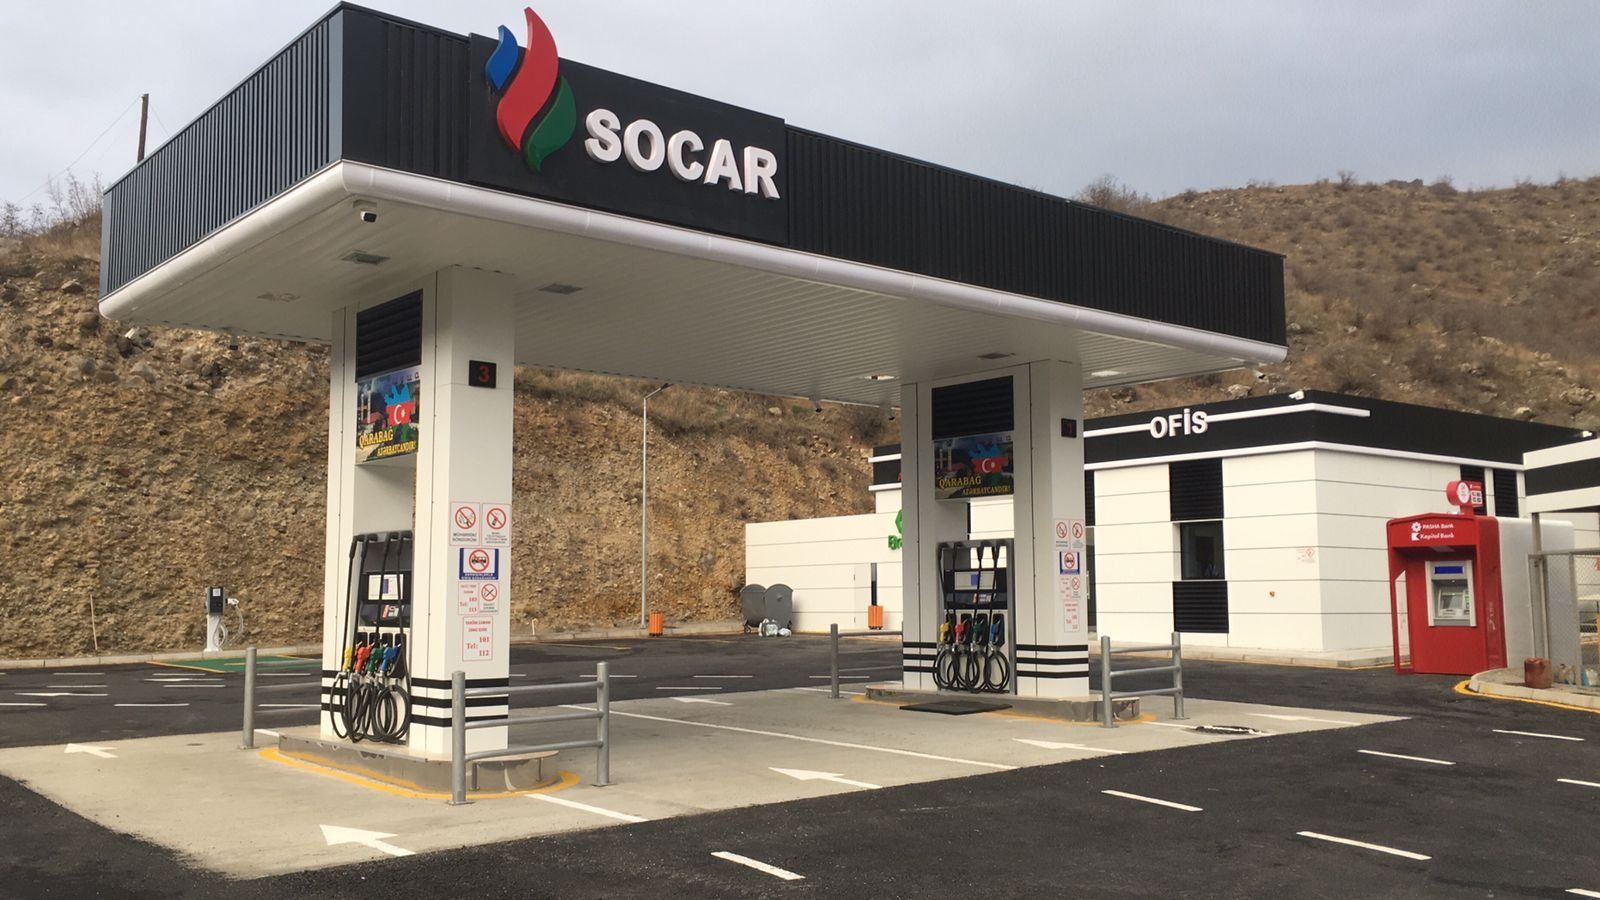 SOCAR: No problems with sale of any types of fuels in Azerbaijan